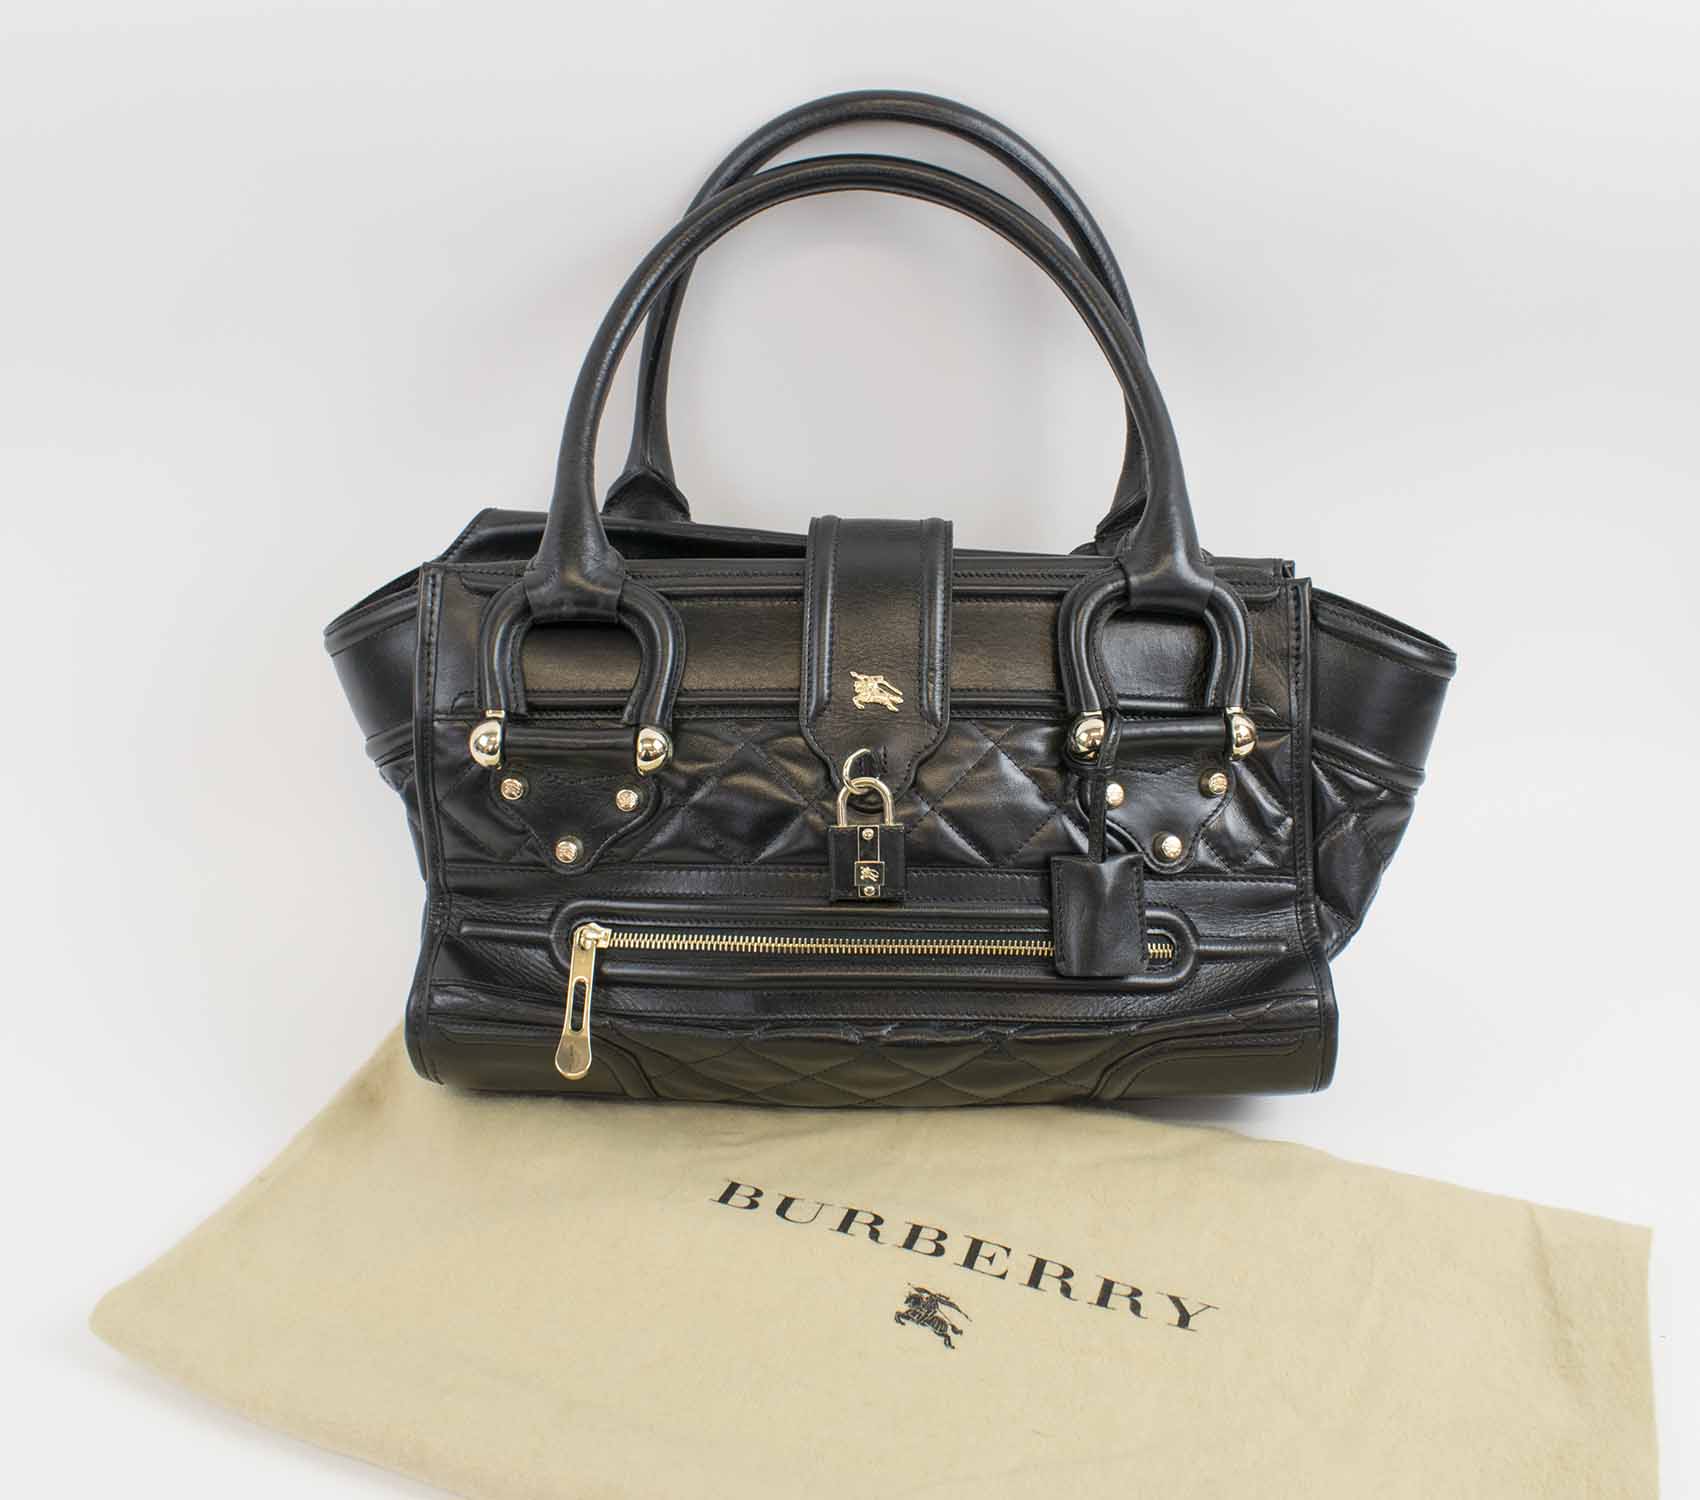 BURBERRY MANOR BAG, black quilted leather with pale gold tone hardware, two  top handles, top zip closure, front closure strap with padlock and key, zip  front pocket, fabric lining, with dust bag